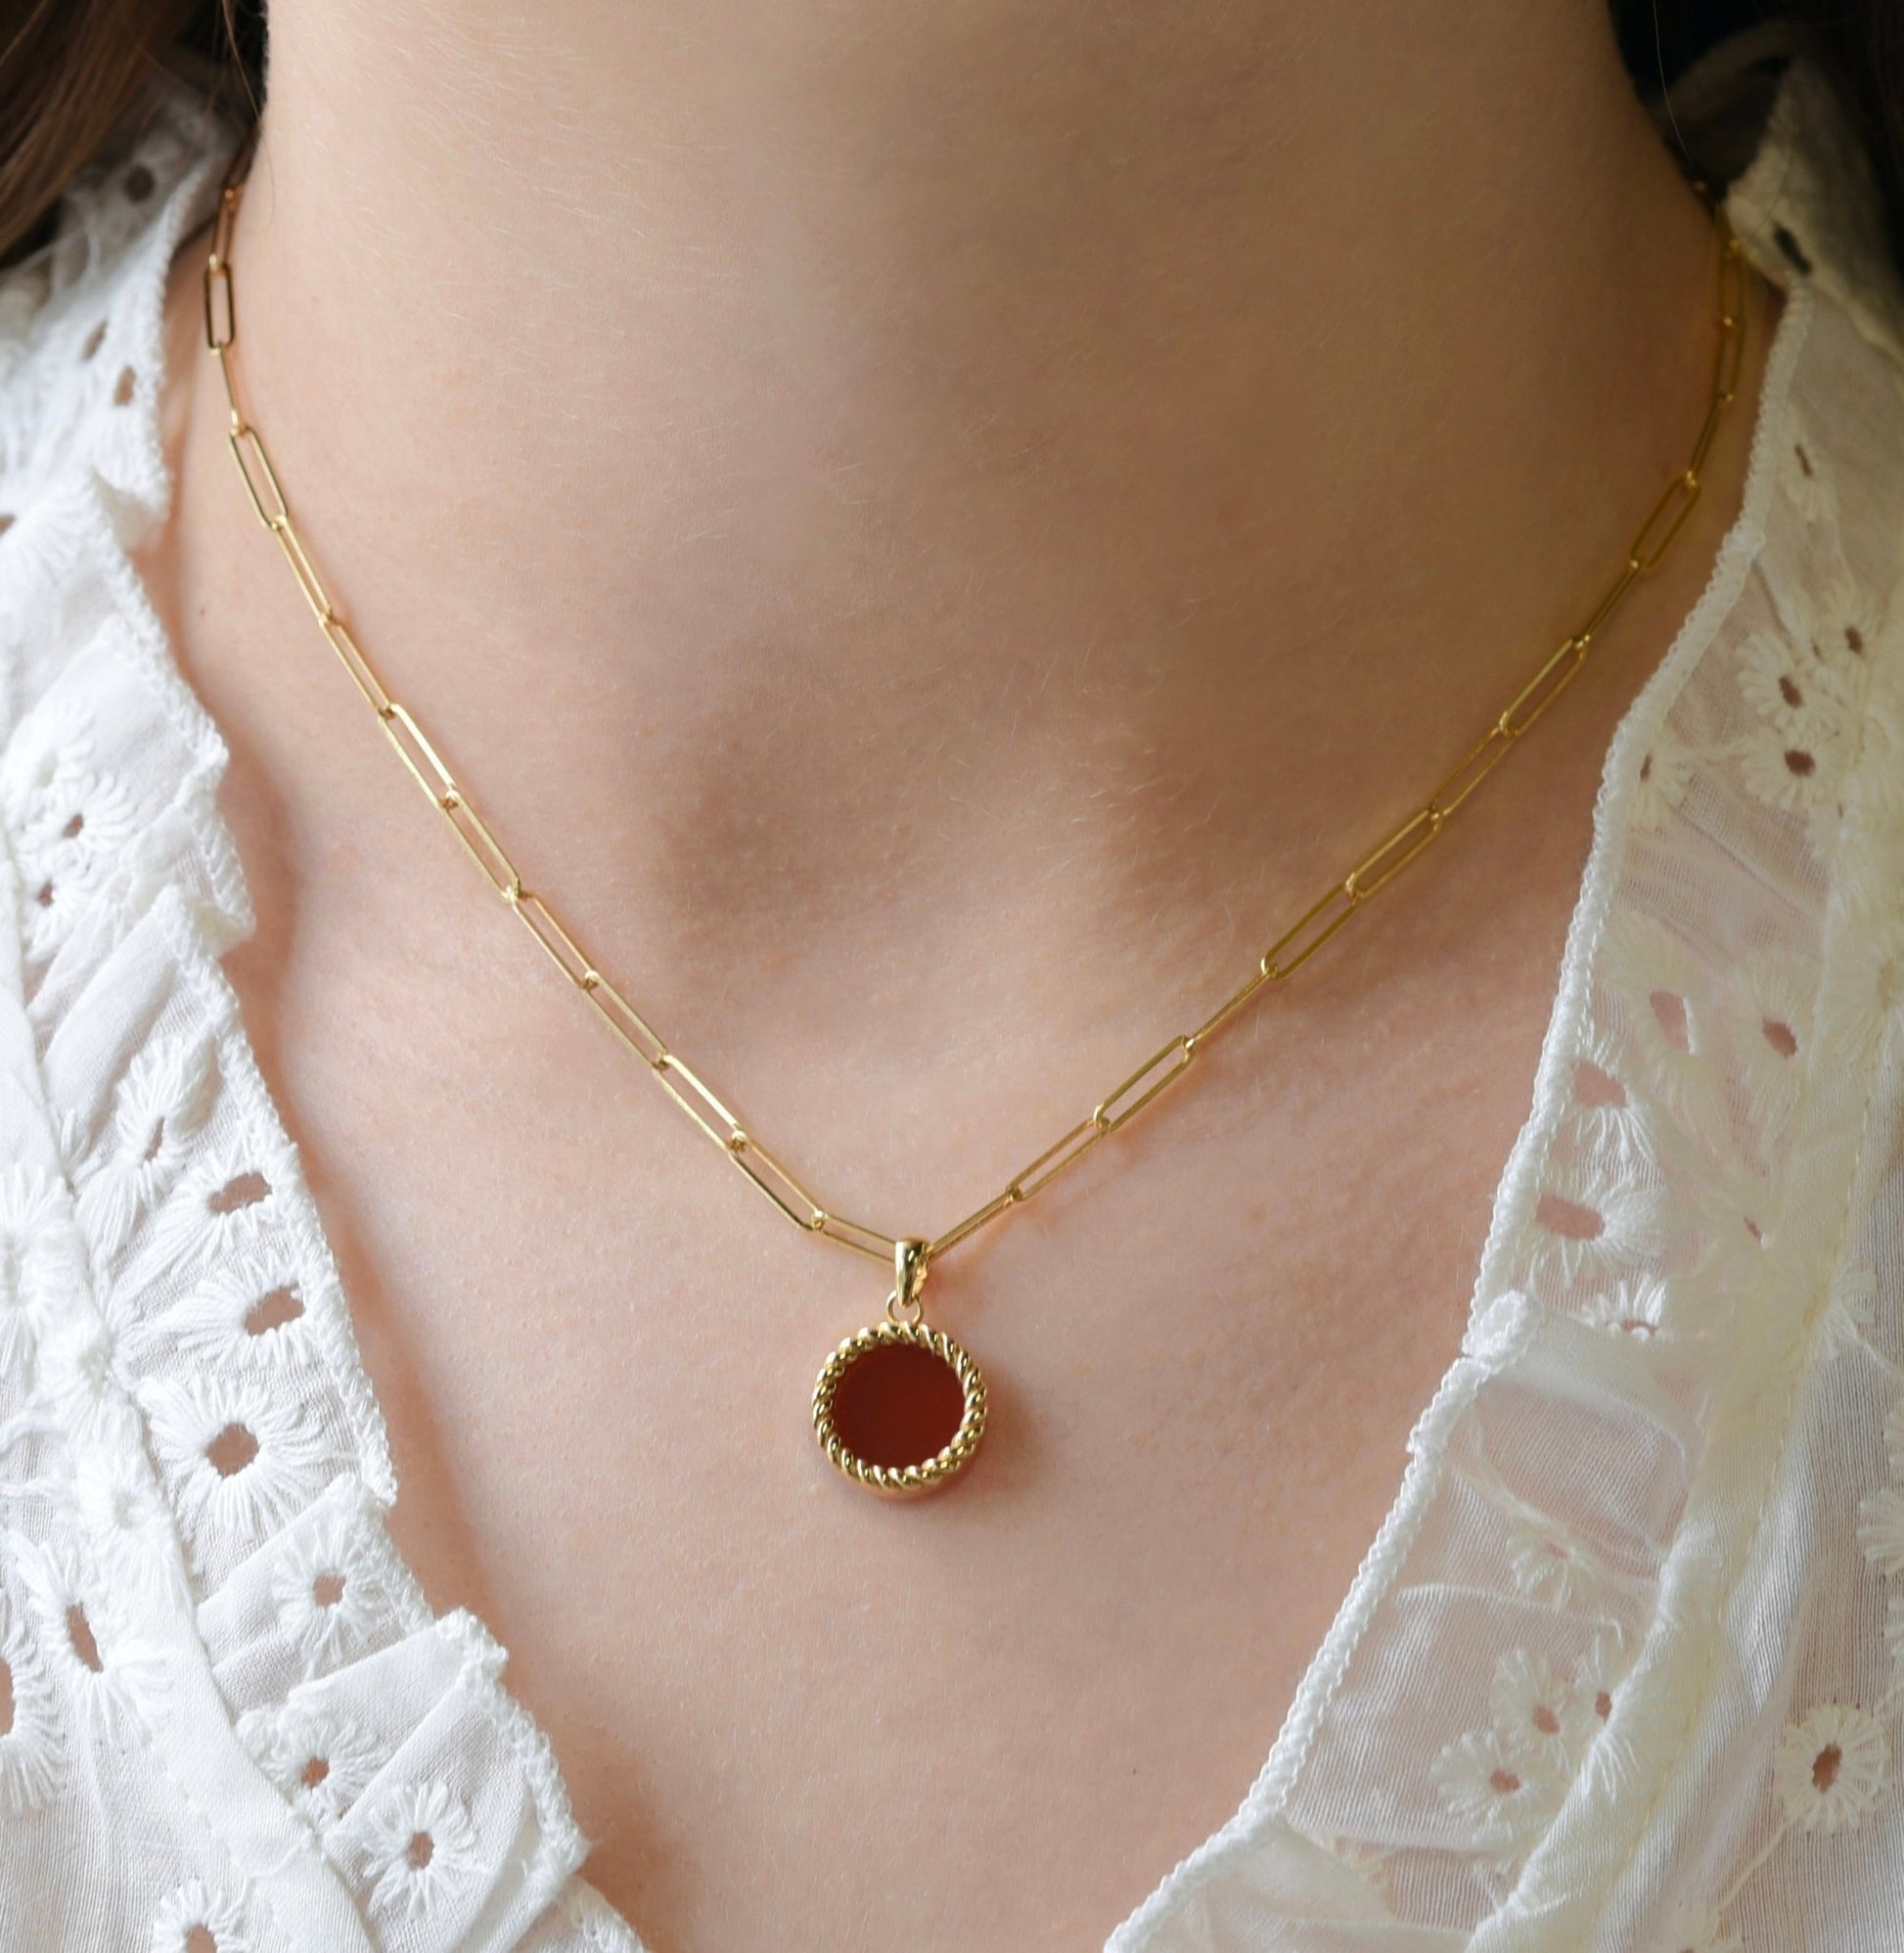 Cord Clips Necklace in Red Carnelian - 18k Gold - Lynor